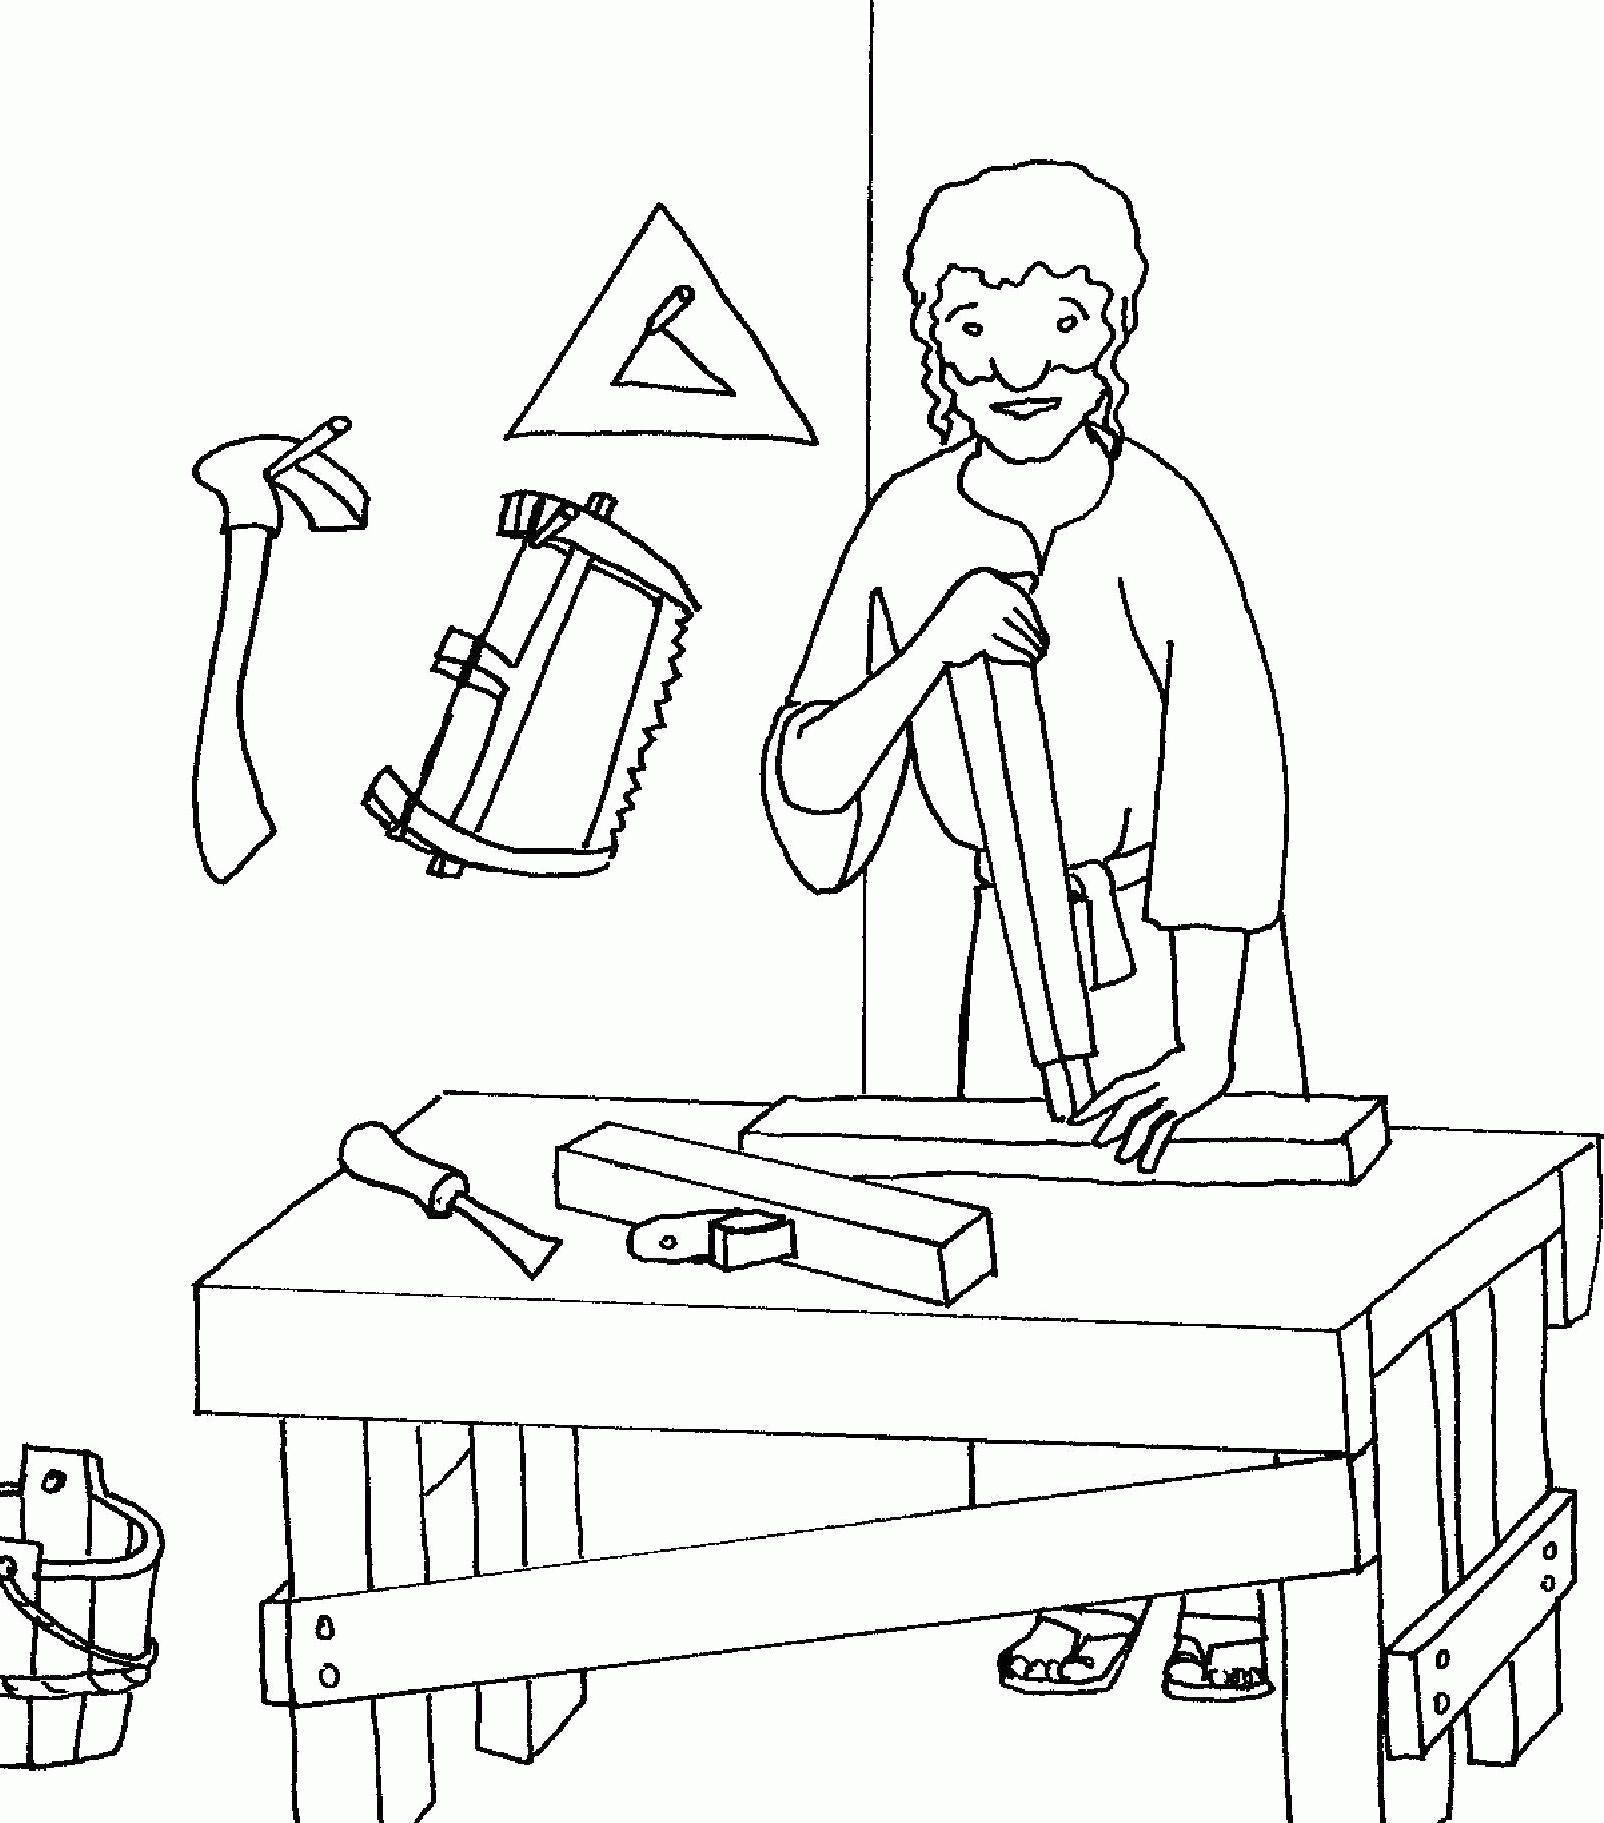 Free St Joseph Coloring Pages, Download Free St Joseph Coloring Pages